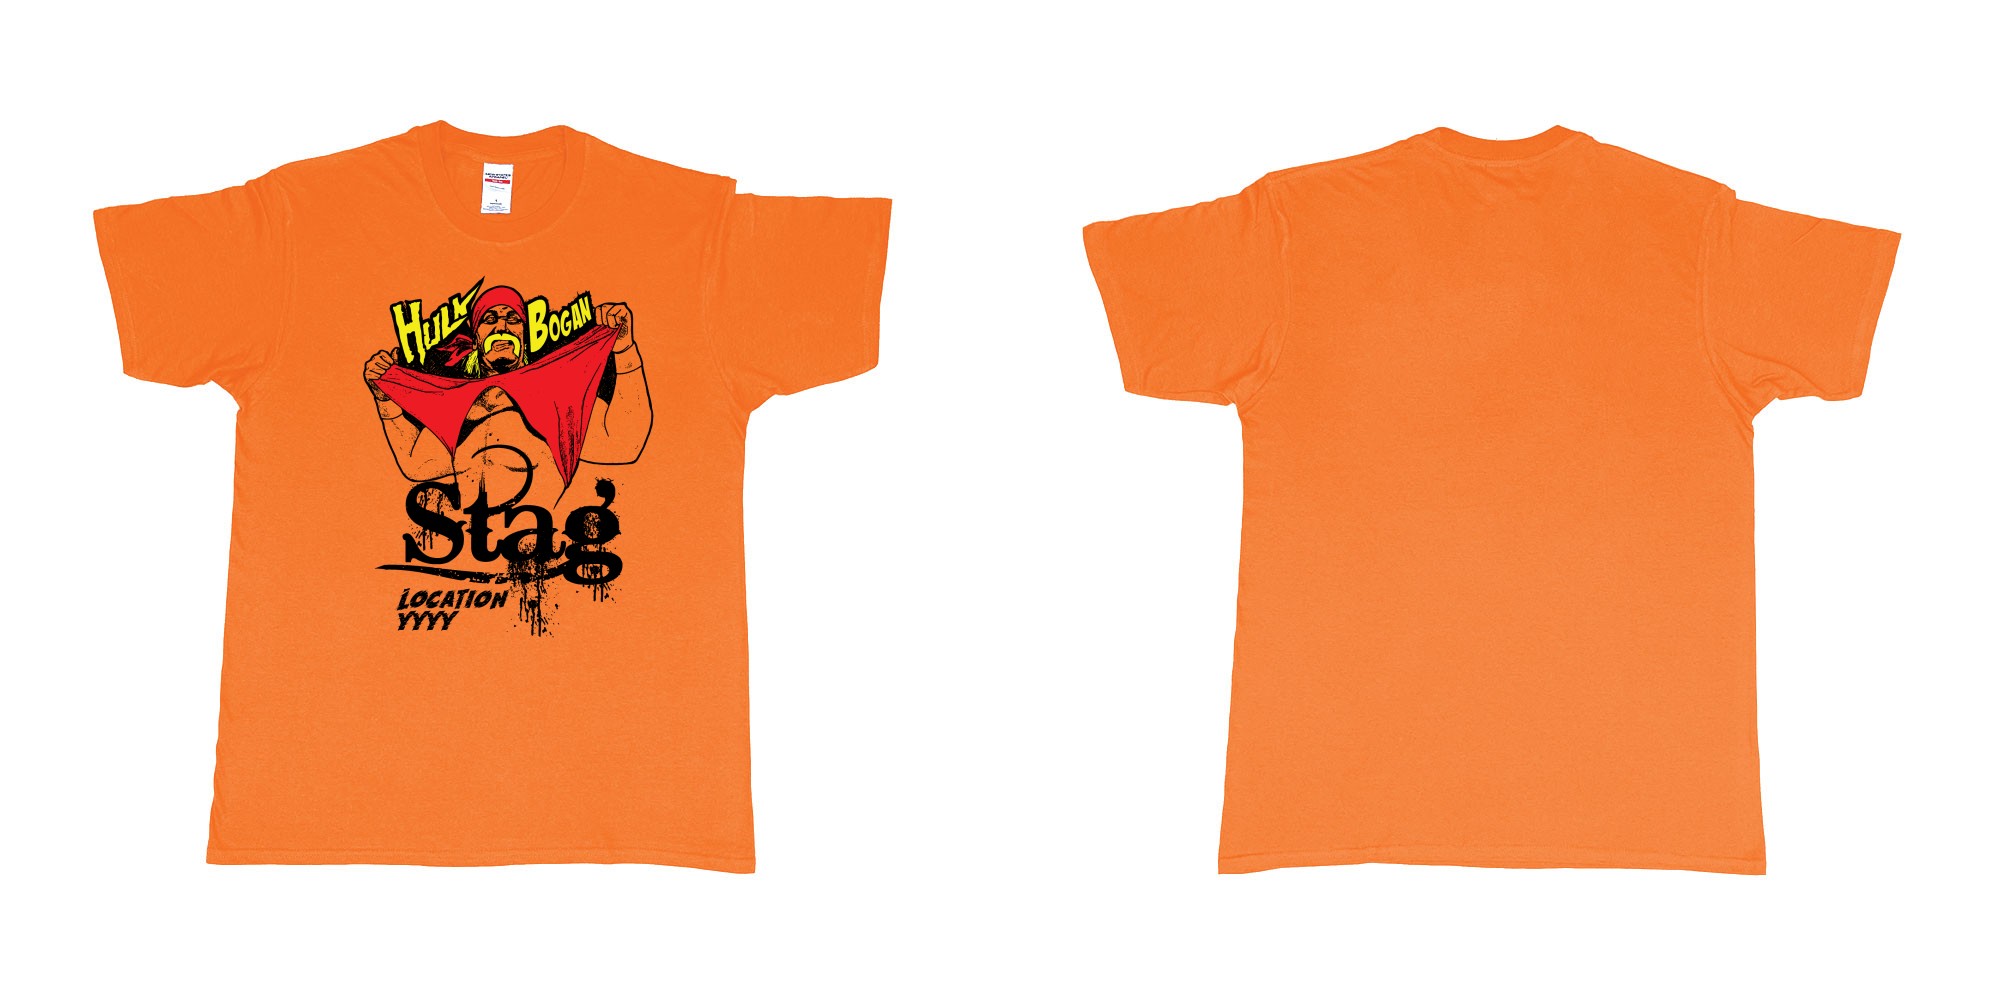 Custom tshirt design hulk hogan bogan in fabric color orange choice your own text made in Bali by The Pirate Way